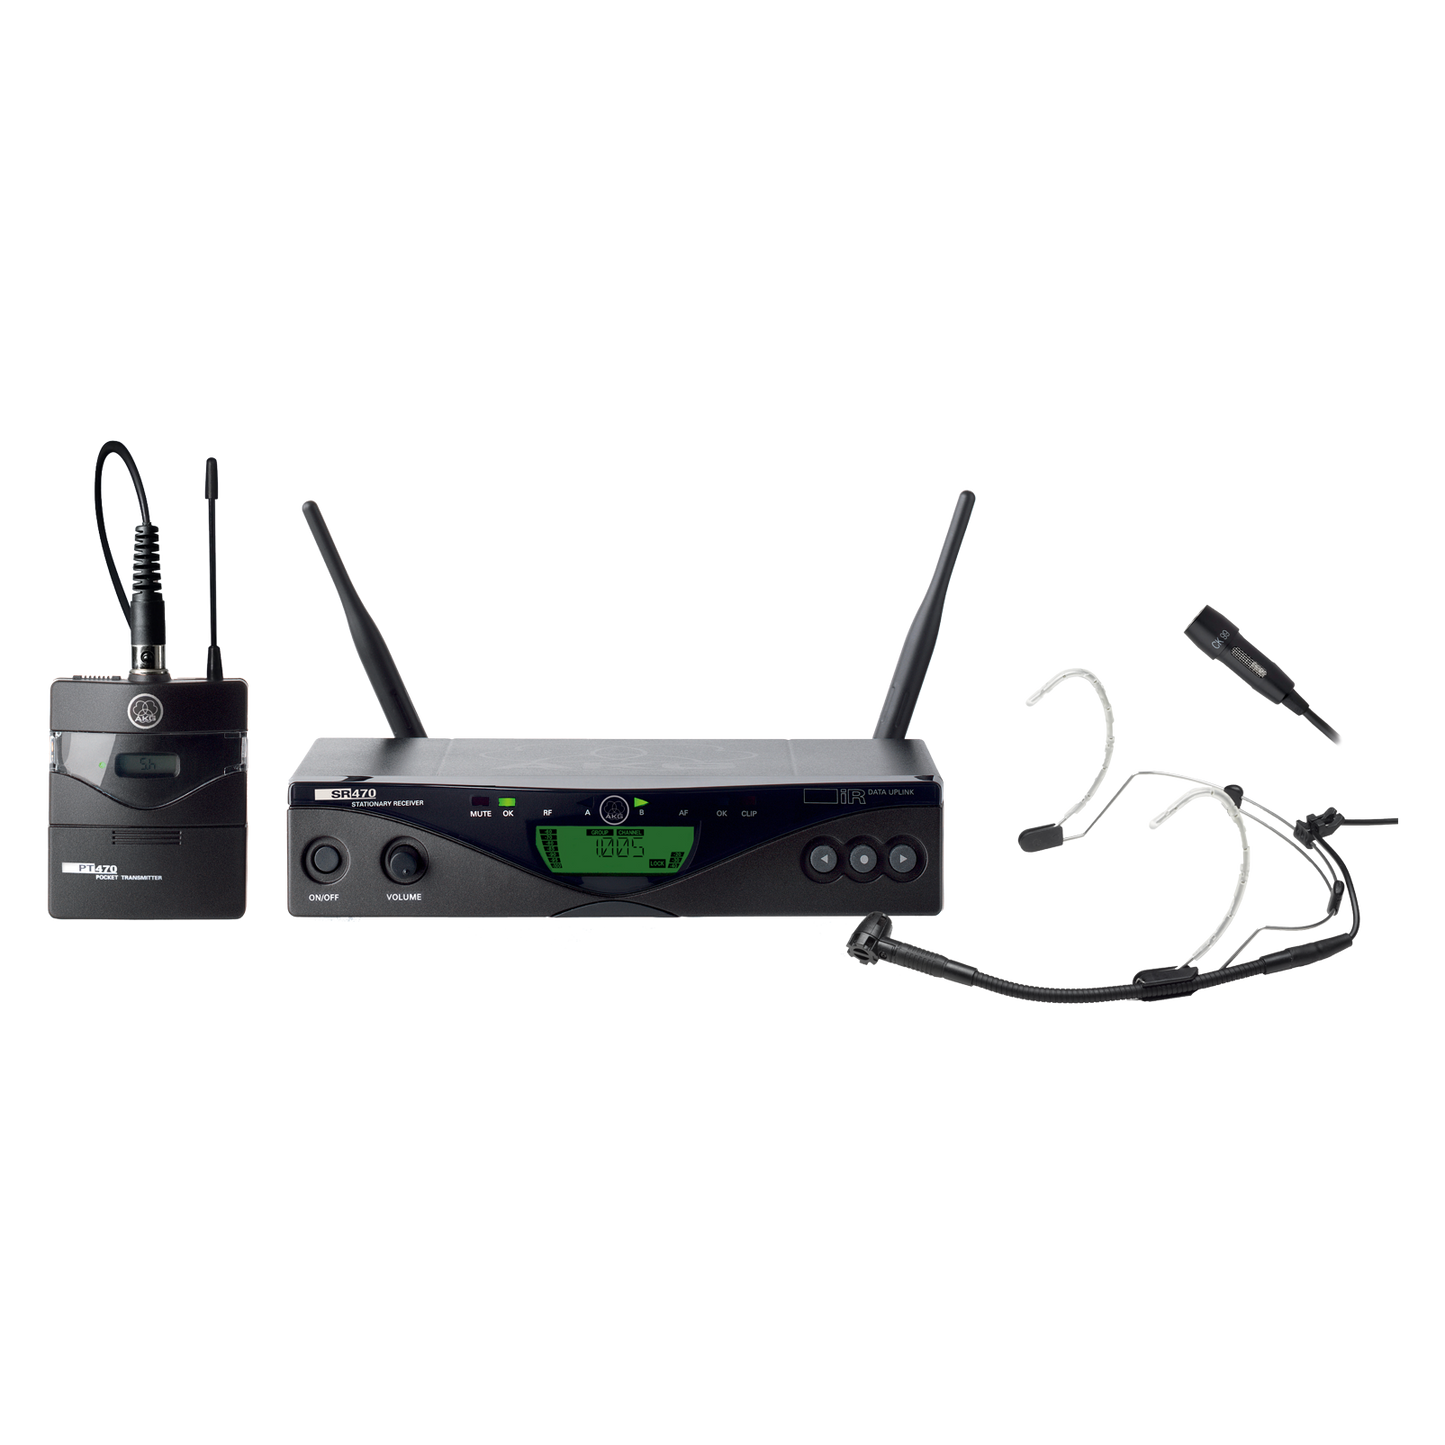 AKG WMS470 PRESENTER SET Wireless Microphone System with C555 Headworn Microphone and CK99L Lavalier Microphone